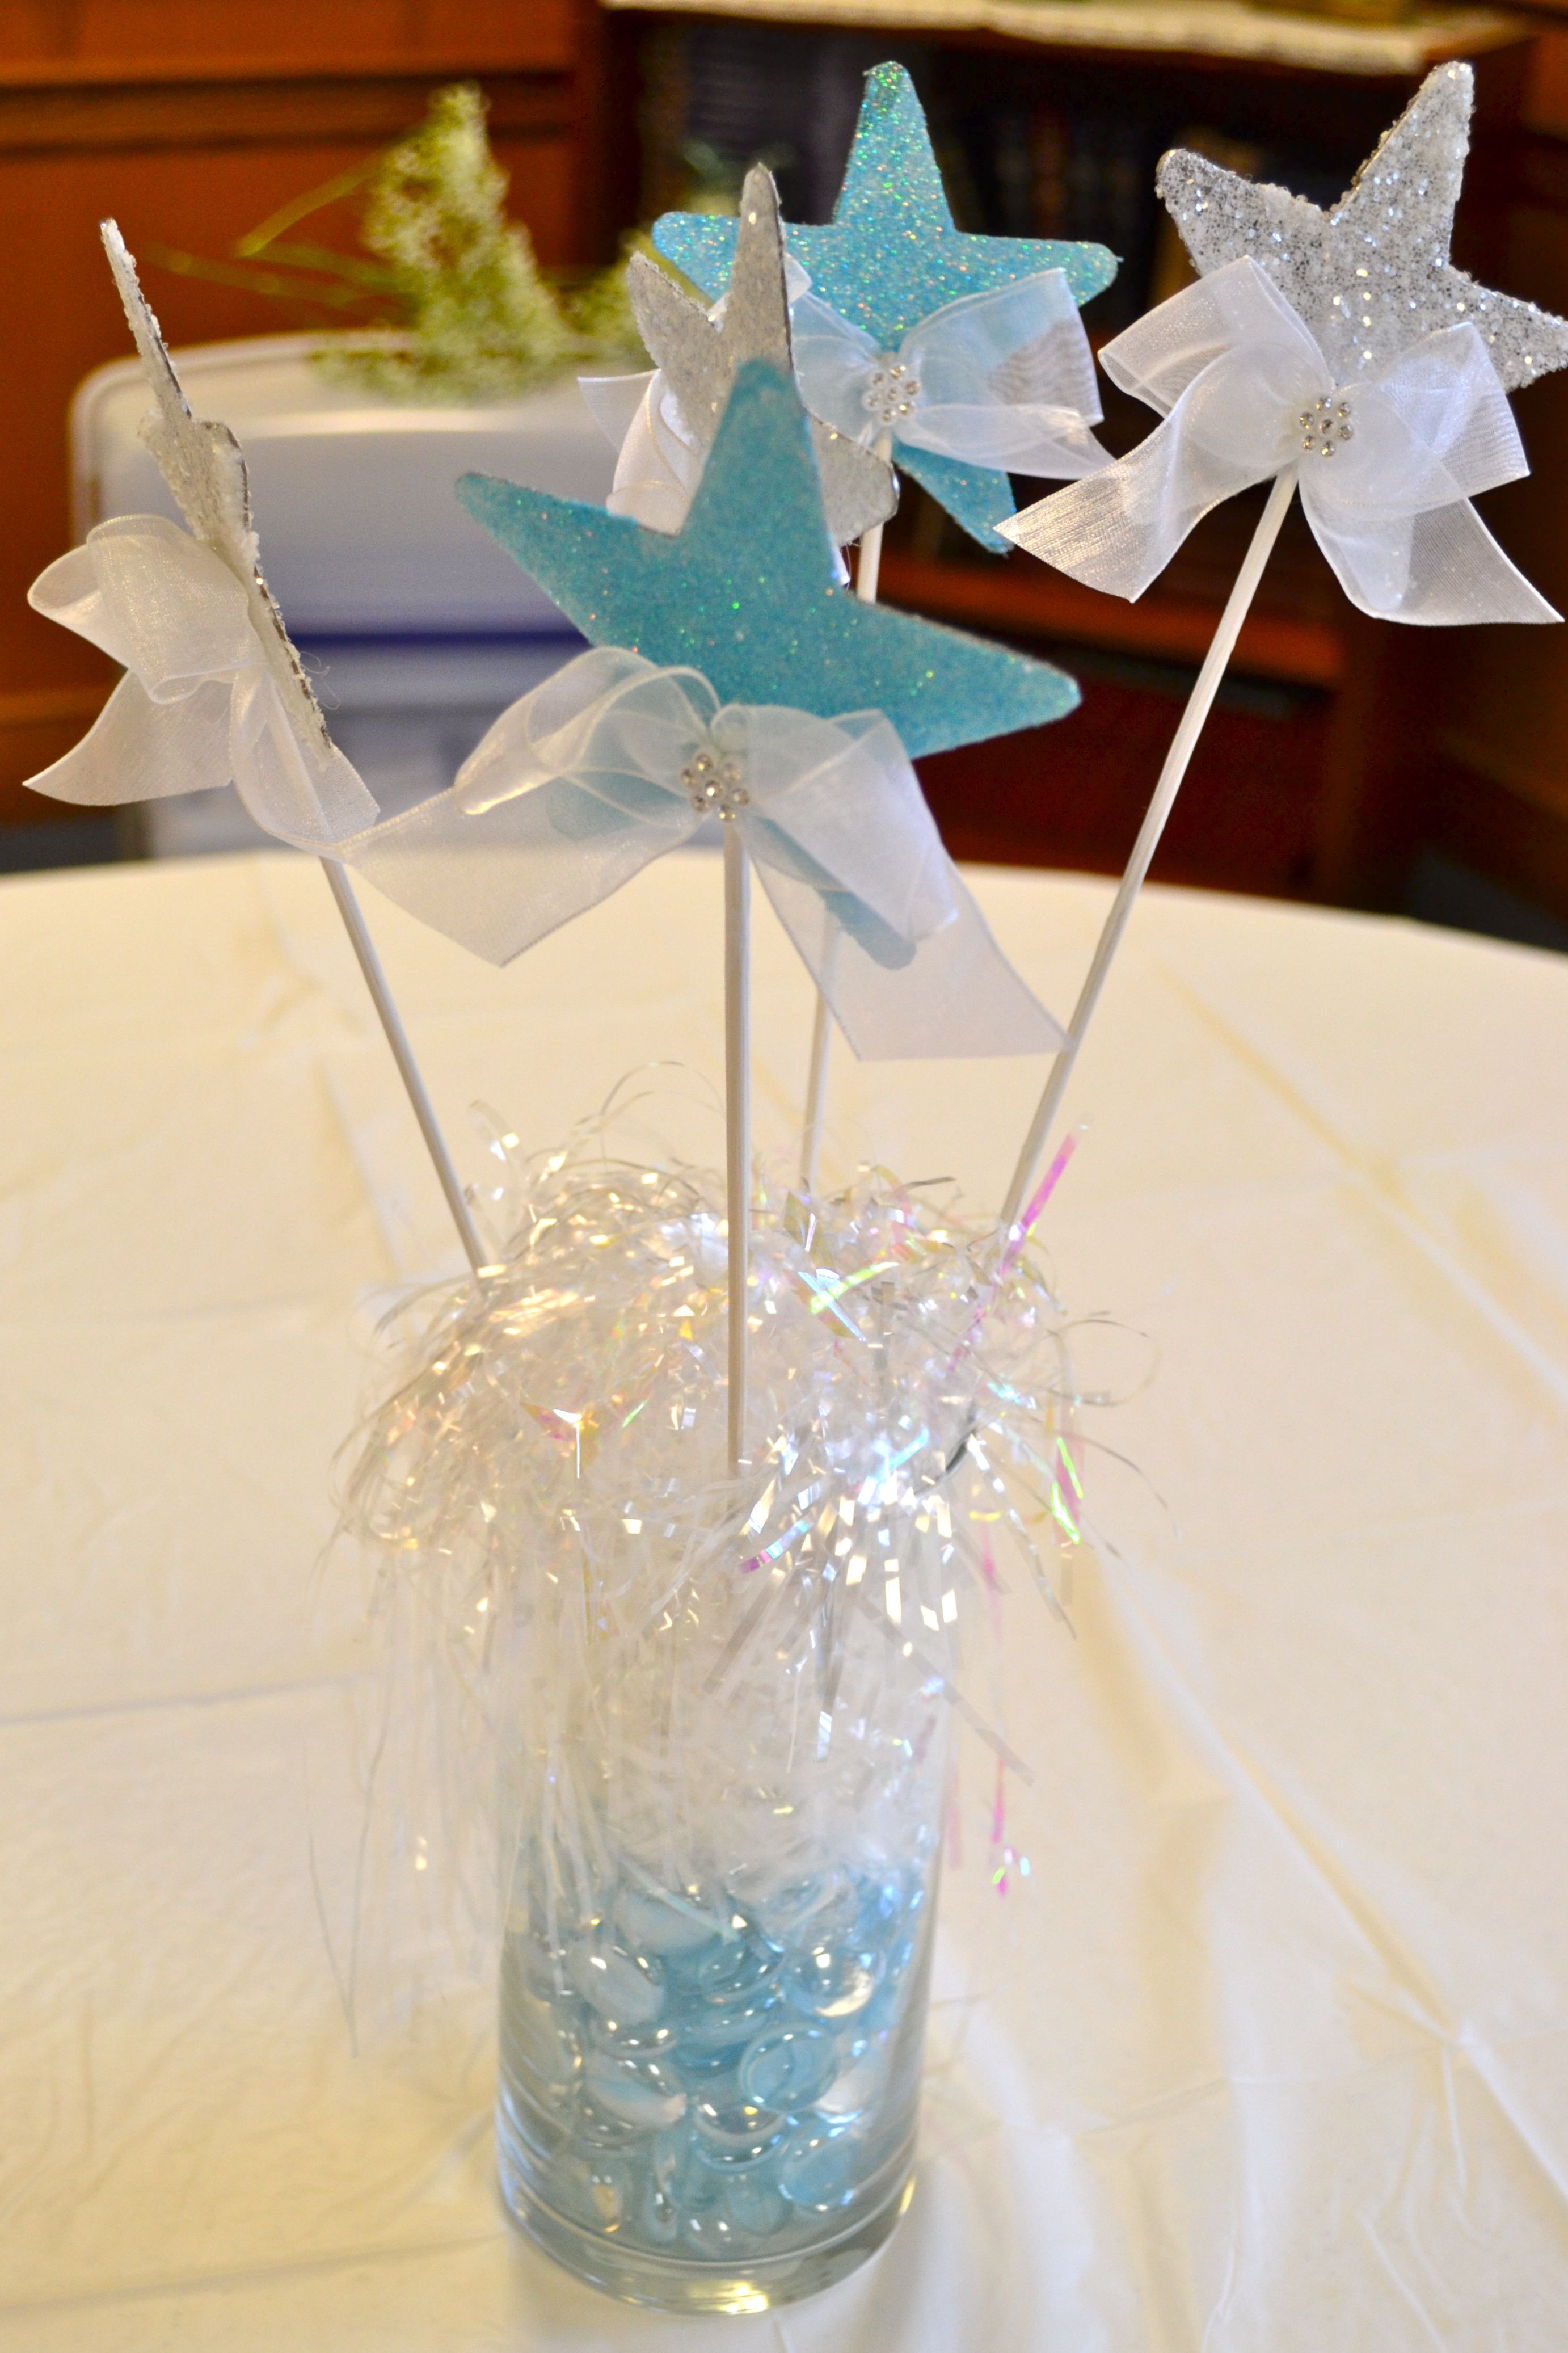 baby blue vase of little star centerpieces empty glass vase filled with silver pertaining to little star centerpieces empty glass vase filled with silver white and blue shiny stuff attach stars to sticks and put them in vase